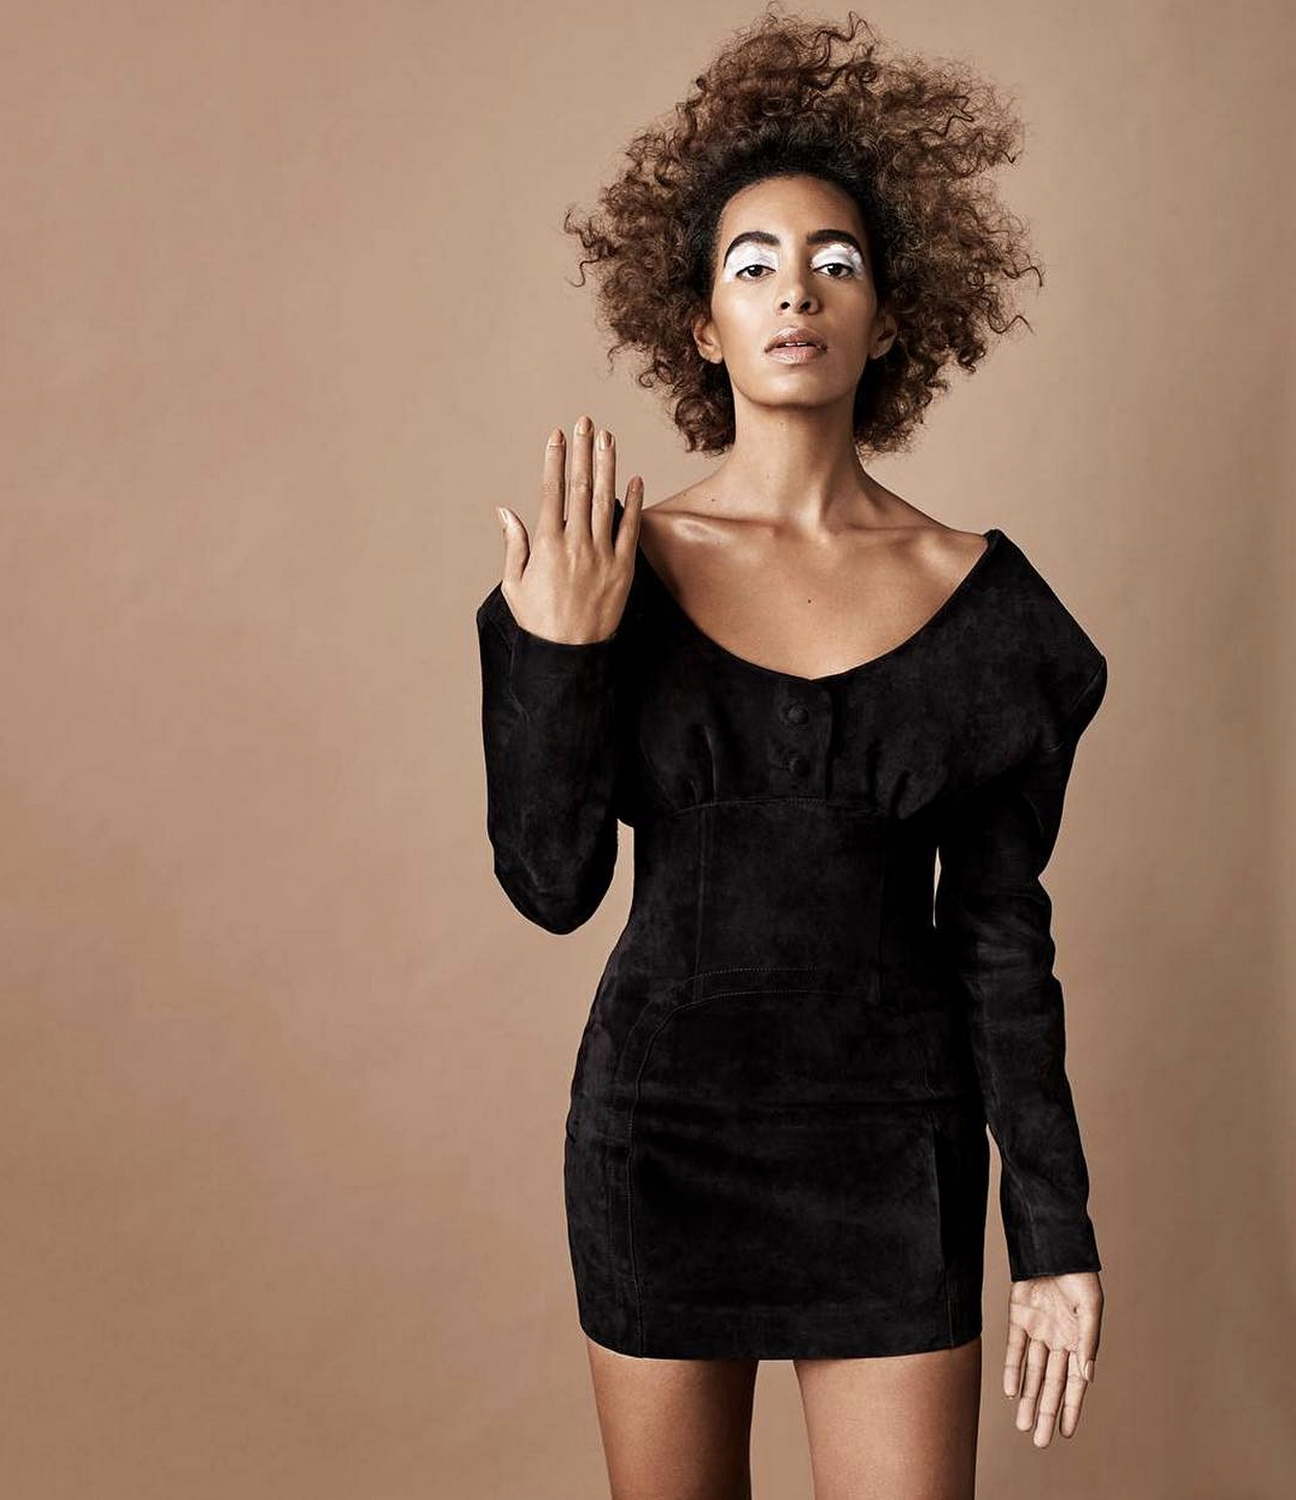 Proud Black Feminist Solange Poses For The Magazine Cover Of Bust Trace